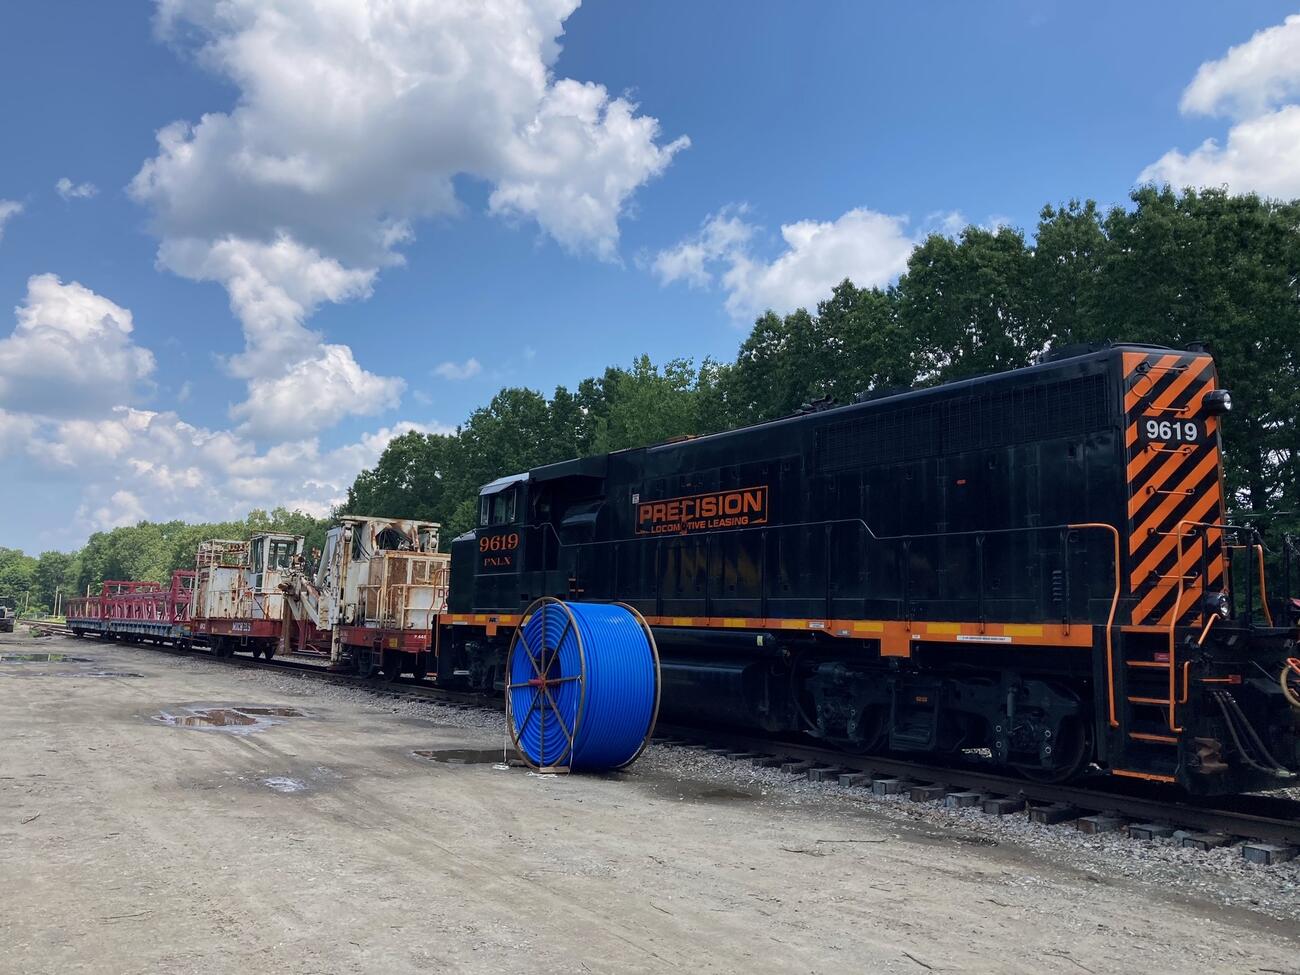 A reel of blue innerduct sits next to a plow train, which will be used to install the innerduct underground.